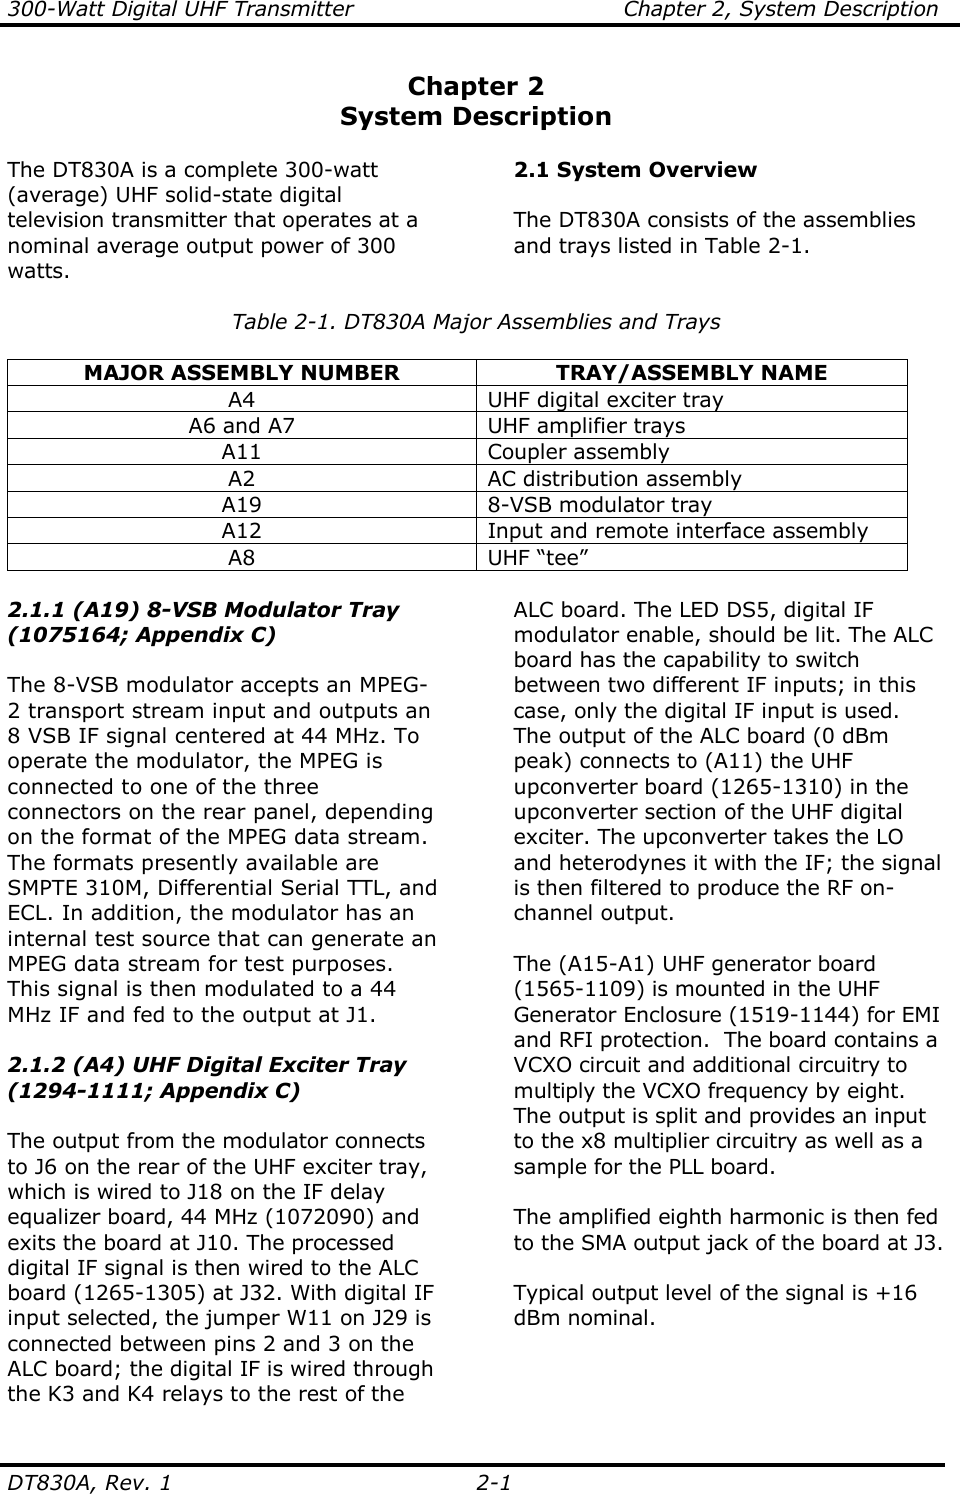 300-Watt Digital UHF Transmitter                                      Chapter 2, System Description  DT830A, Rev. 1  2-1 Chapter 2 System Description  The DT830A is a complete 300-watt (average) UHF solid-state digital television transmitter that operates at a nominal average output power of 300 watts.  2.1 System Overview  The DT830A consists of the assemblies and trays listed in Table 2-1.  Table 2-1. DT830A Major Assemblies and Trays  MAJOR ASSEMBLY NUMBER  TRAY/ASSEMBLY NAME A4  UHF digital exciter tray A6 and A7  UHF amplifier trays A11  Coupler assembly A2  AC distribution assembly A19  8-VSB modulator tray A12  Input and remote interface assembly A8  UHF “tee”   2.1.1 (A19) 8-VSB Modulator Tray (1075164; Appendix C)  The 8-VSB modulator accepts an MPEG-2 transport stream input and outputs an 8 VSB IF signal centered at 44 MHz. To operate the modulator, the MPEG is connected to one of the three connectors on the rear panel, depending on the format of the MPEG data stream. The formats presently available are SMPTE 310M, Differential Serial TTL, and ECL. In addition, the modulator has an internal test source that can generate an MPEG data stream for test purposes. This signal is then modulated to a 44 MHz IF and fed to the output at J1.  2.1.2 (A4) UHF Digital Exciter Tray (1294-1111; Appendix C)  The output from the modulator connects to J6 on the rear of the UHF exciter tray, which is wired to J18 on the IF delay equalizer board, 44 MHz (1072090) and exits the board at J10. The processed digital IF signal is then wired to the ALC board (1265-1305) at J32. With digital IF input selected, the jumper W11 on J29 is connected between pins 2 and 3 on the ALC board; the digital IF is wired through the K3 and K4 relays to the rest of the ALC board. The LED DS5, digital IF modulator enable, should be lit. The ALC board has the capability to switch between two different IF inputs; in this case, only the digital IF input is used. The output of the ALC board (0 dBm peak) connects to (A11) the UHF upconverter board (1265-1310) in the upconverter section of the UHF digital exciter. The upconverter takes the LO and heterodynes it with the IF; the signal is then filtered to produce the RF on-channel output.  The (A15-A1) UHF generator board (1565-1109) is mounted in the UHF Generator Enclosure (1519-1144) for EMI and RFI protection.  The board contains a VCXO circuit and additional circuitry to multiply the VCXO frequency by eight.  The output is split and provides an input to the x8 multiplier circuitry as well as a sample for the PLL board.  The amplified eighth harmonic is then fed to the SMA output jack of the board at J3.  Typical output level of the signal is +16 dBm nominal.    